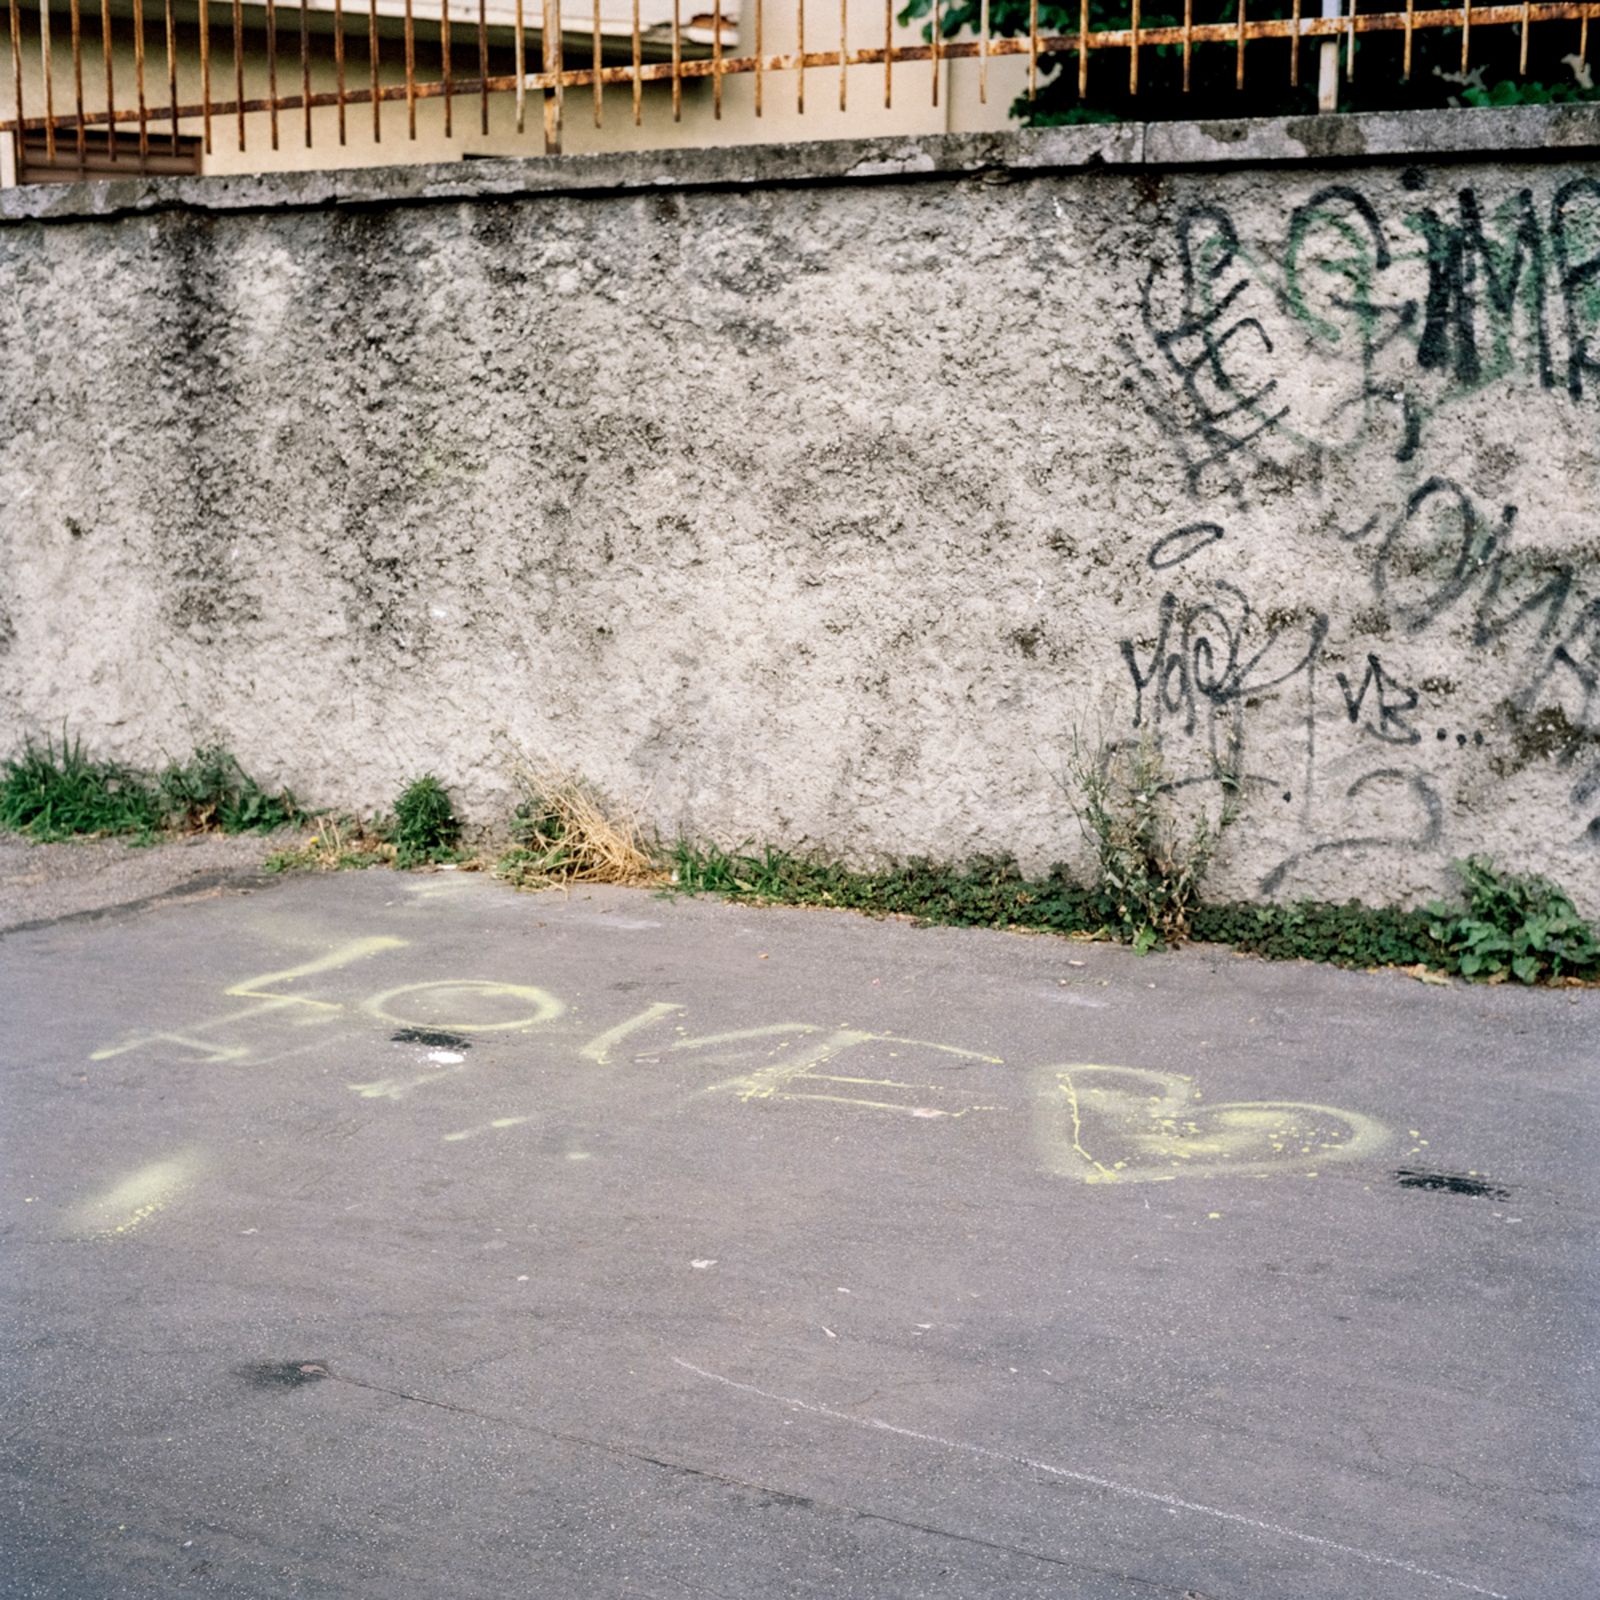 © Federica Sasso - Image from the Post-Adolescence photography project